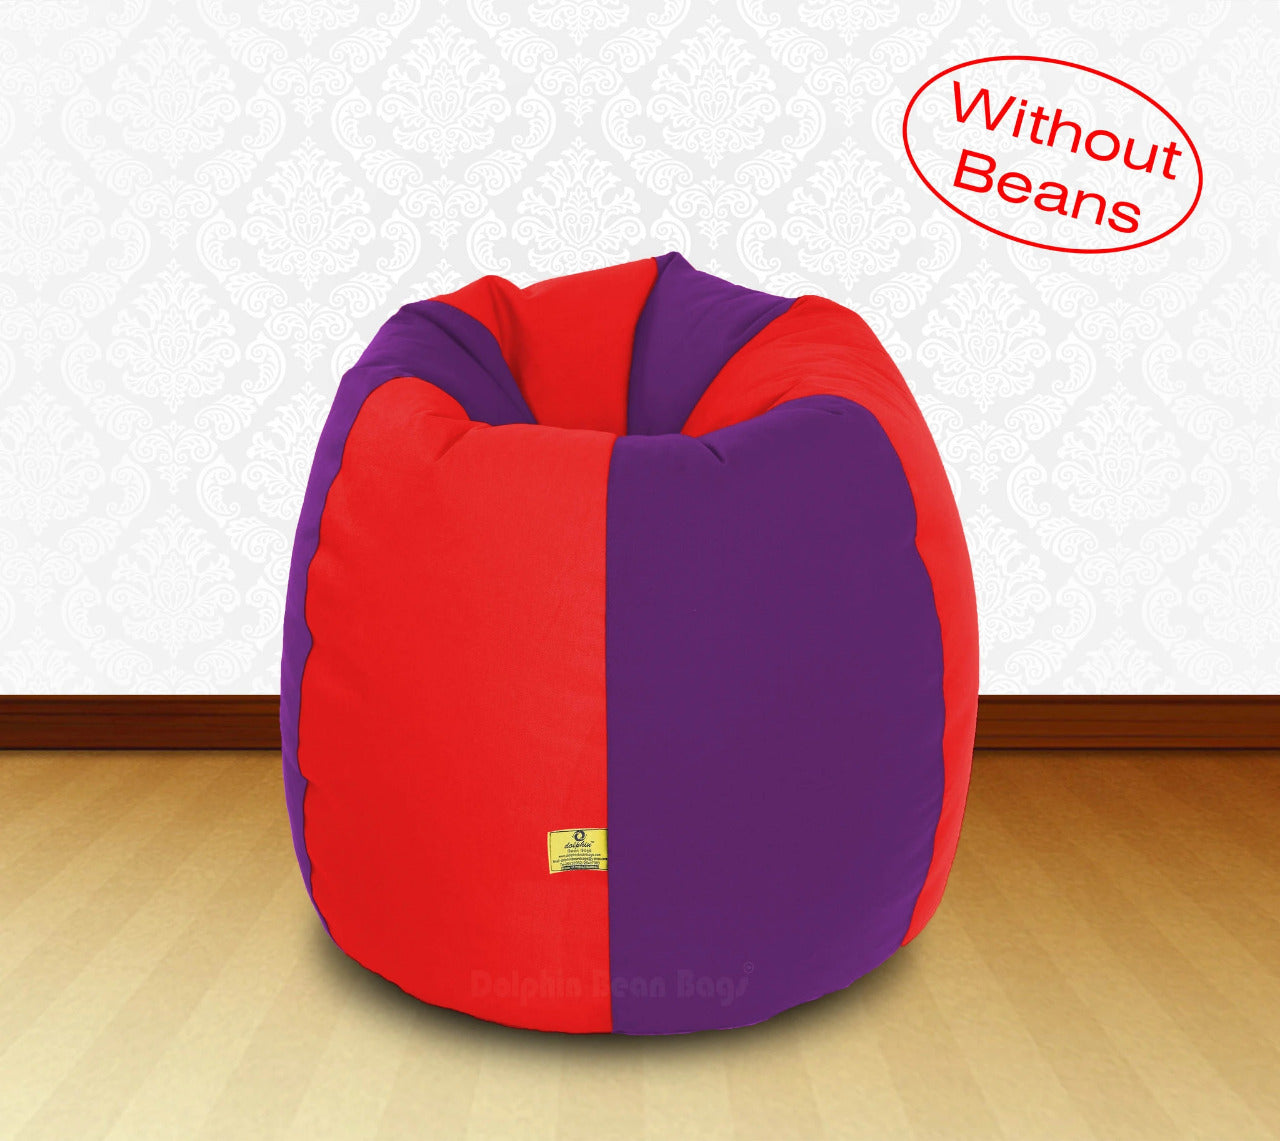 Bean Bag XL Red Purple-FABRIC-COVERS(without Beans)